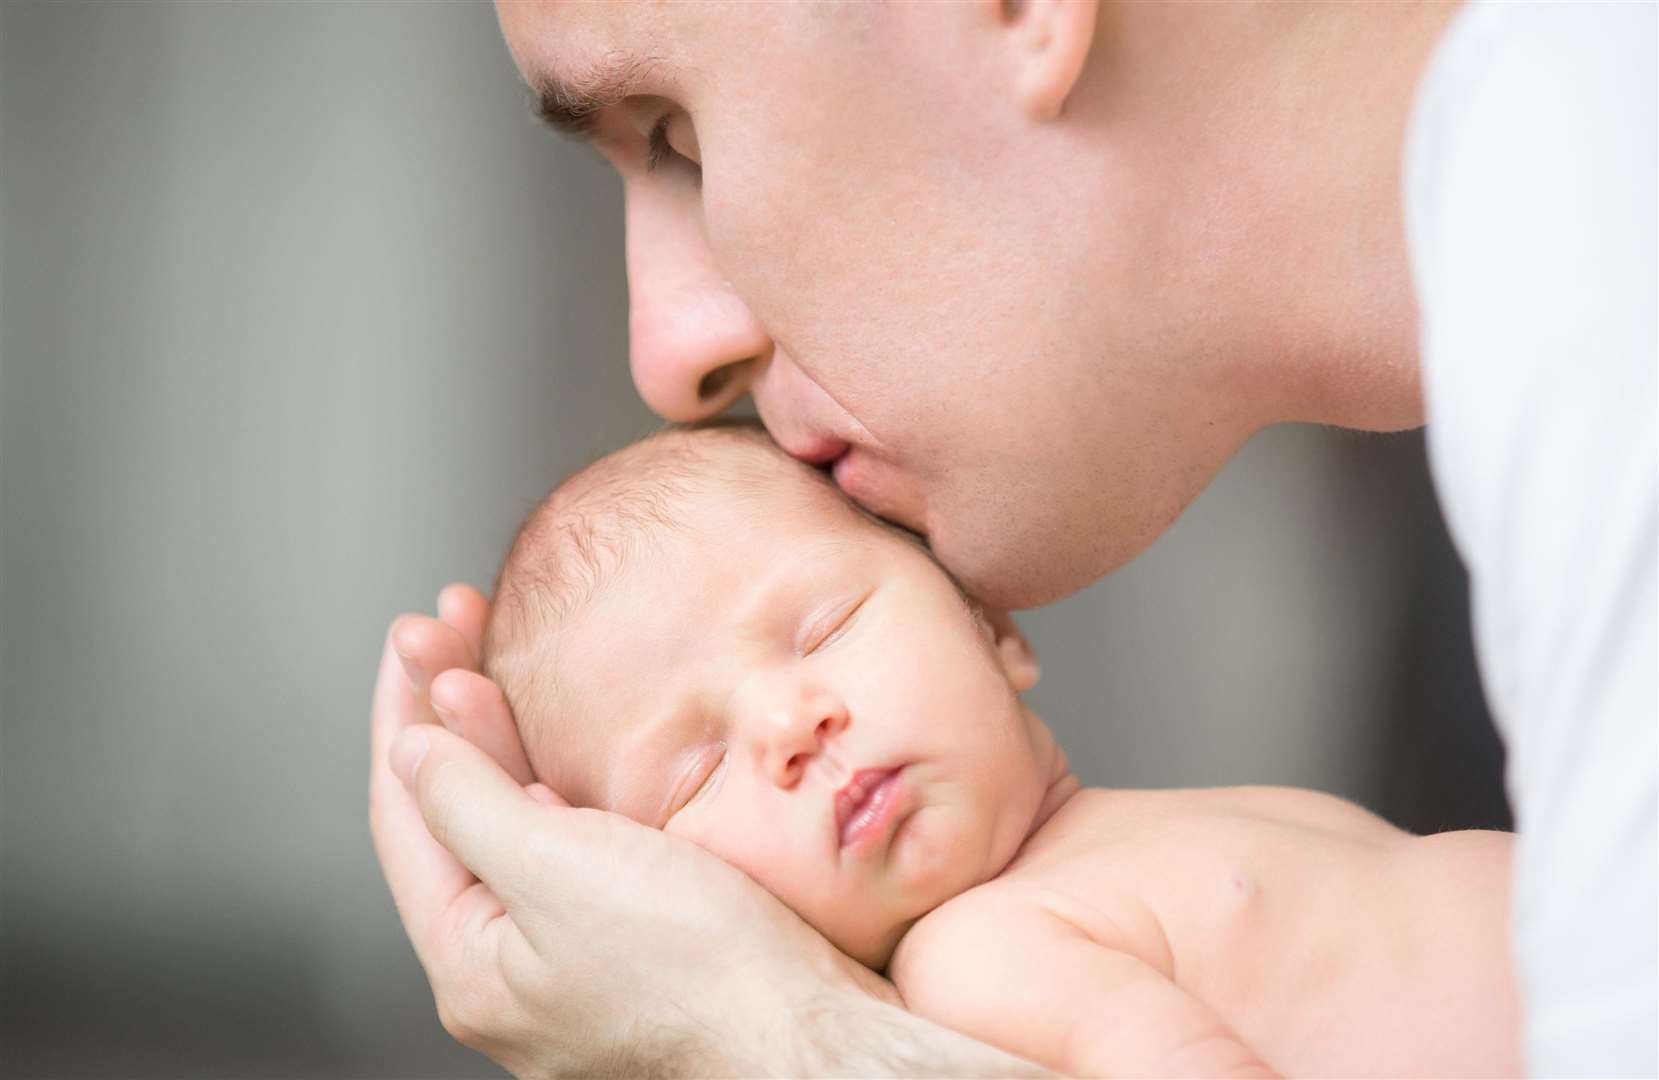 Skin-to-skin contact is important too, to help promote bonding and development